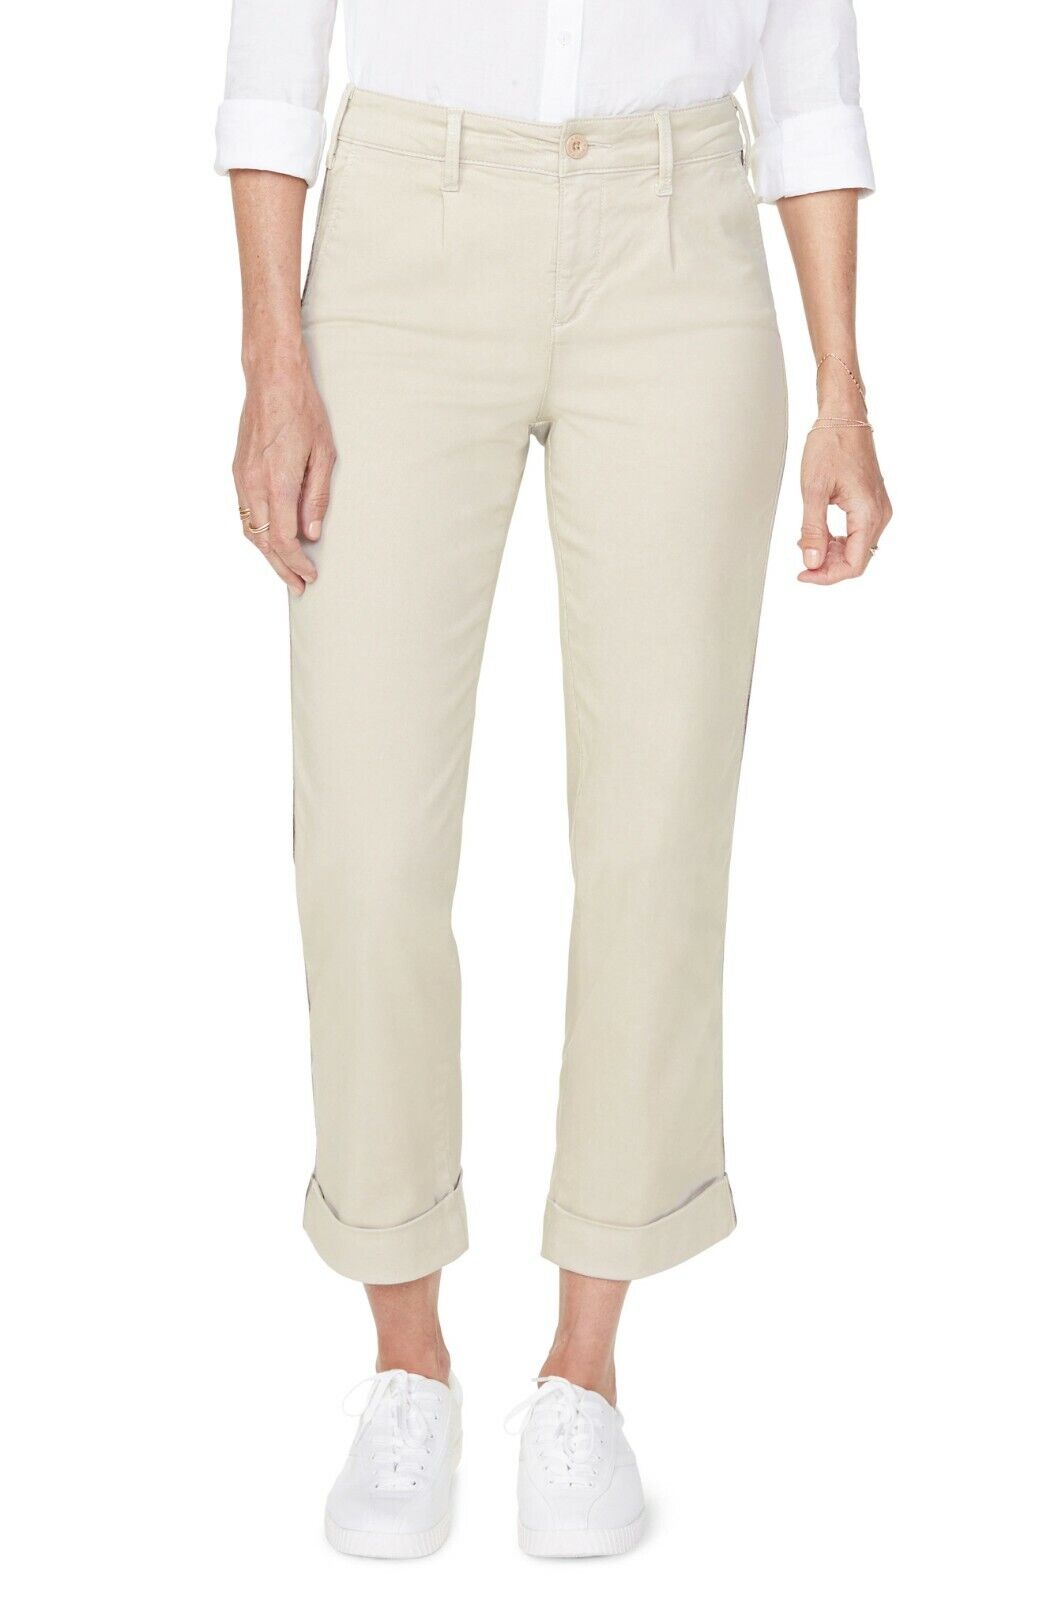 NYDJ Womens 30 4 Feather Beige Side Stripe Straight Leg Ankle Cotton Chino Pants